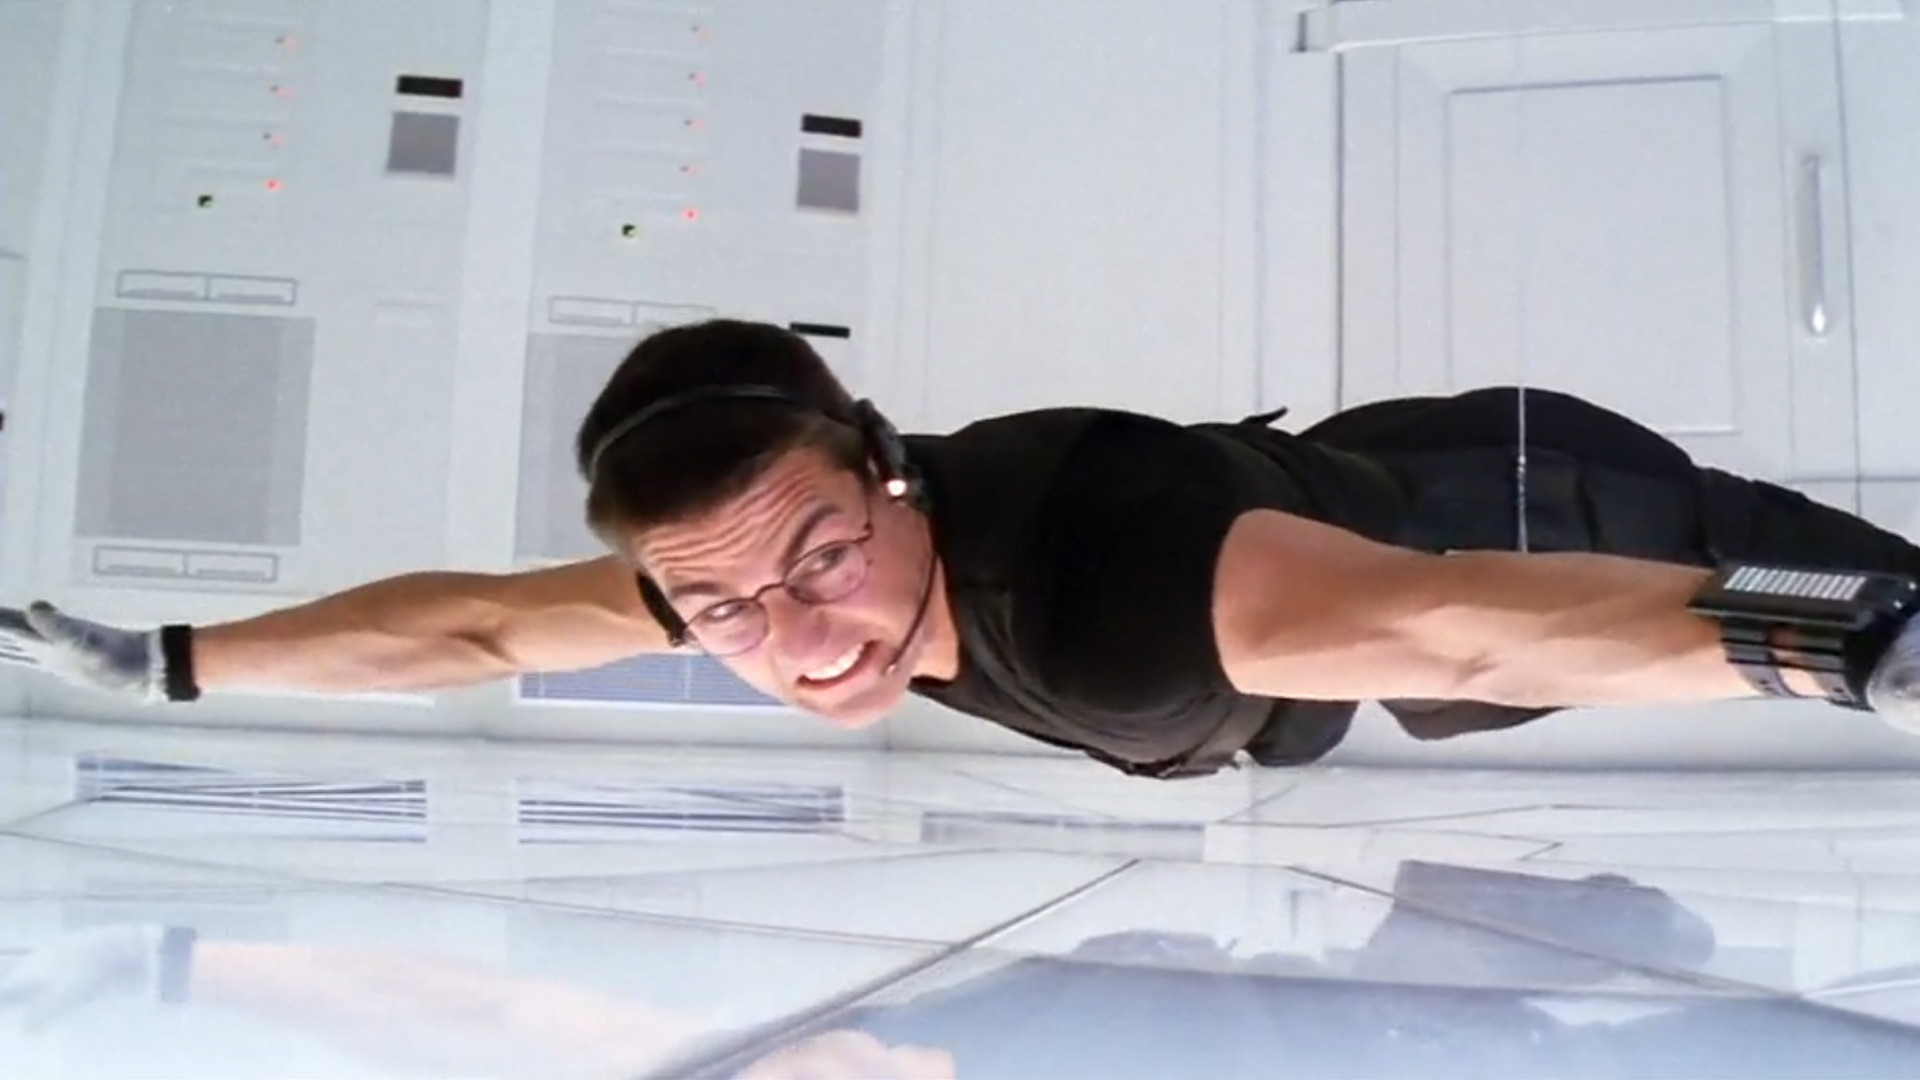 Mission Impossible (1996) Breaking into Langley